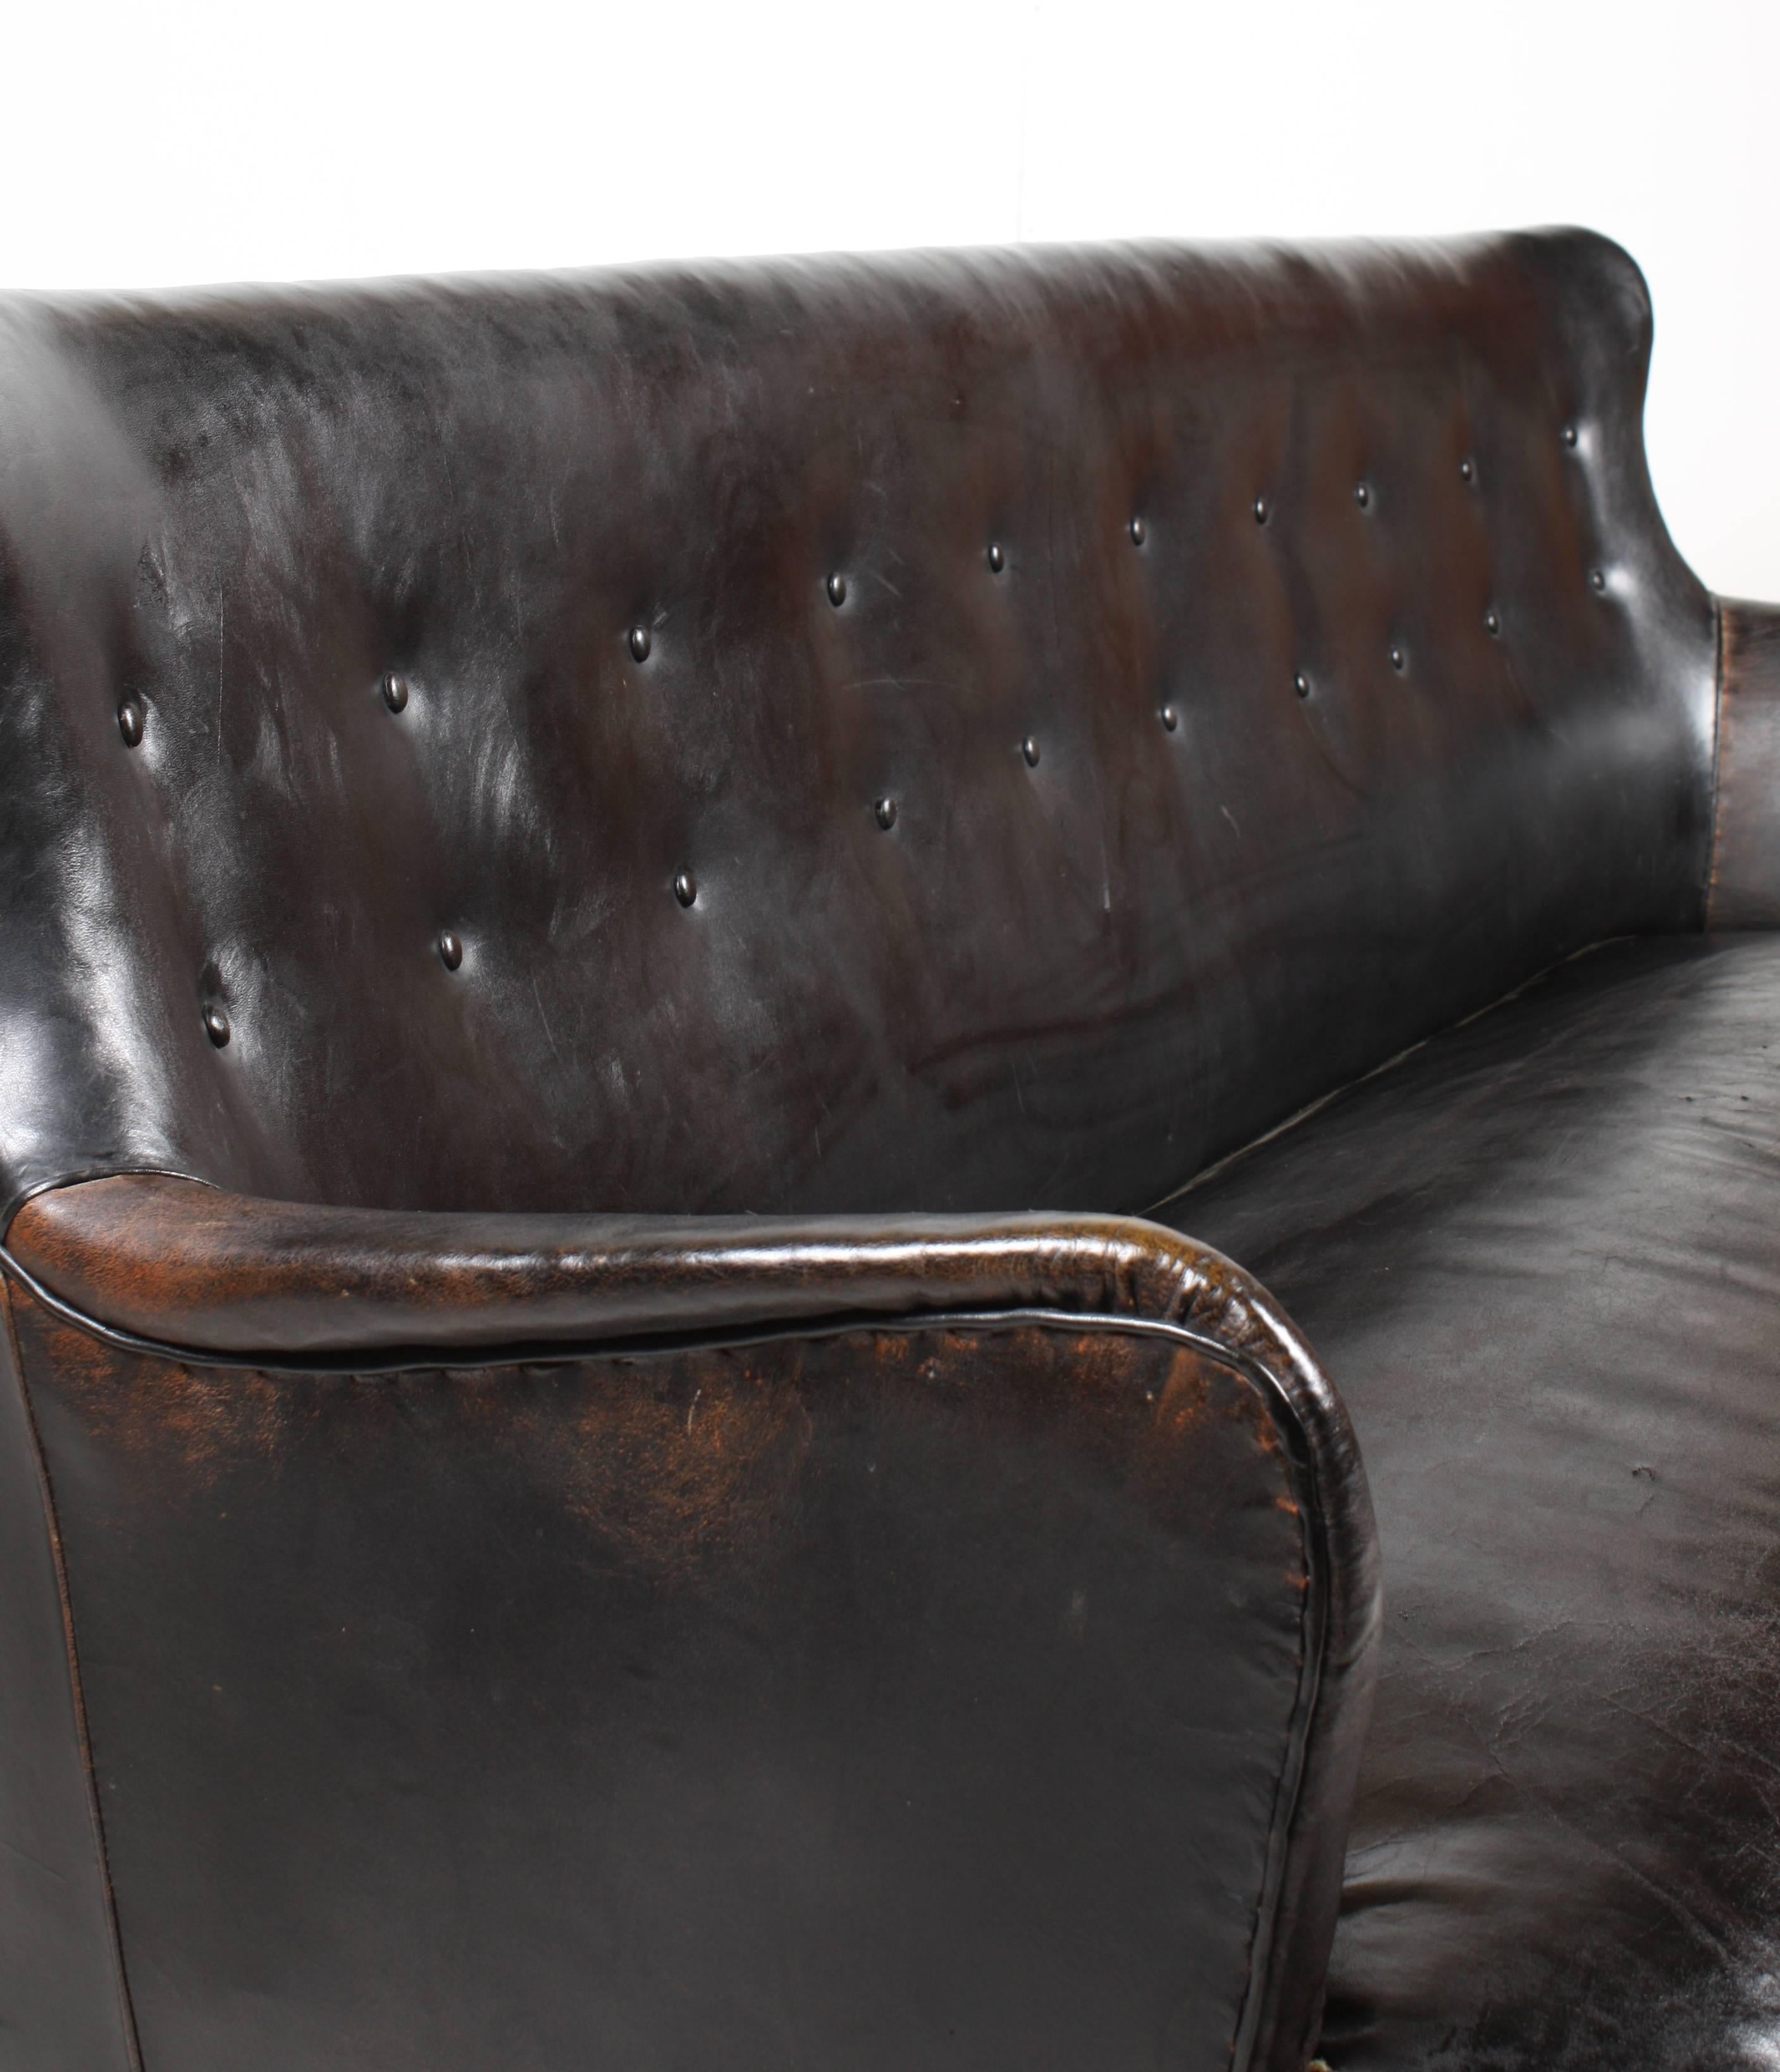 Three-seat sofa in patinated black leather designed by Maa. Peter Hvidt for Fritz Hansen cabinetmakers in the 1950s. Made in Denmark. Good original condition.